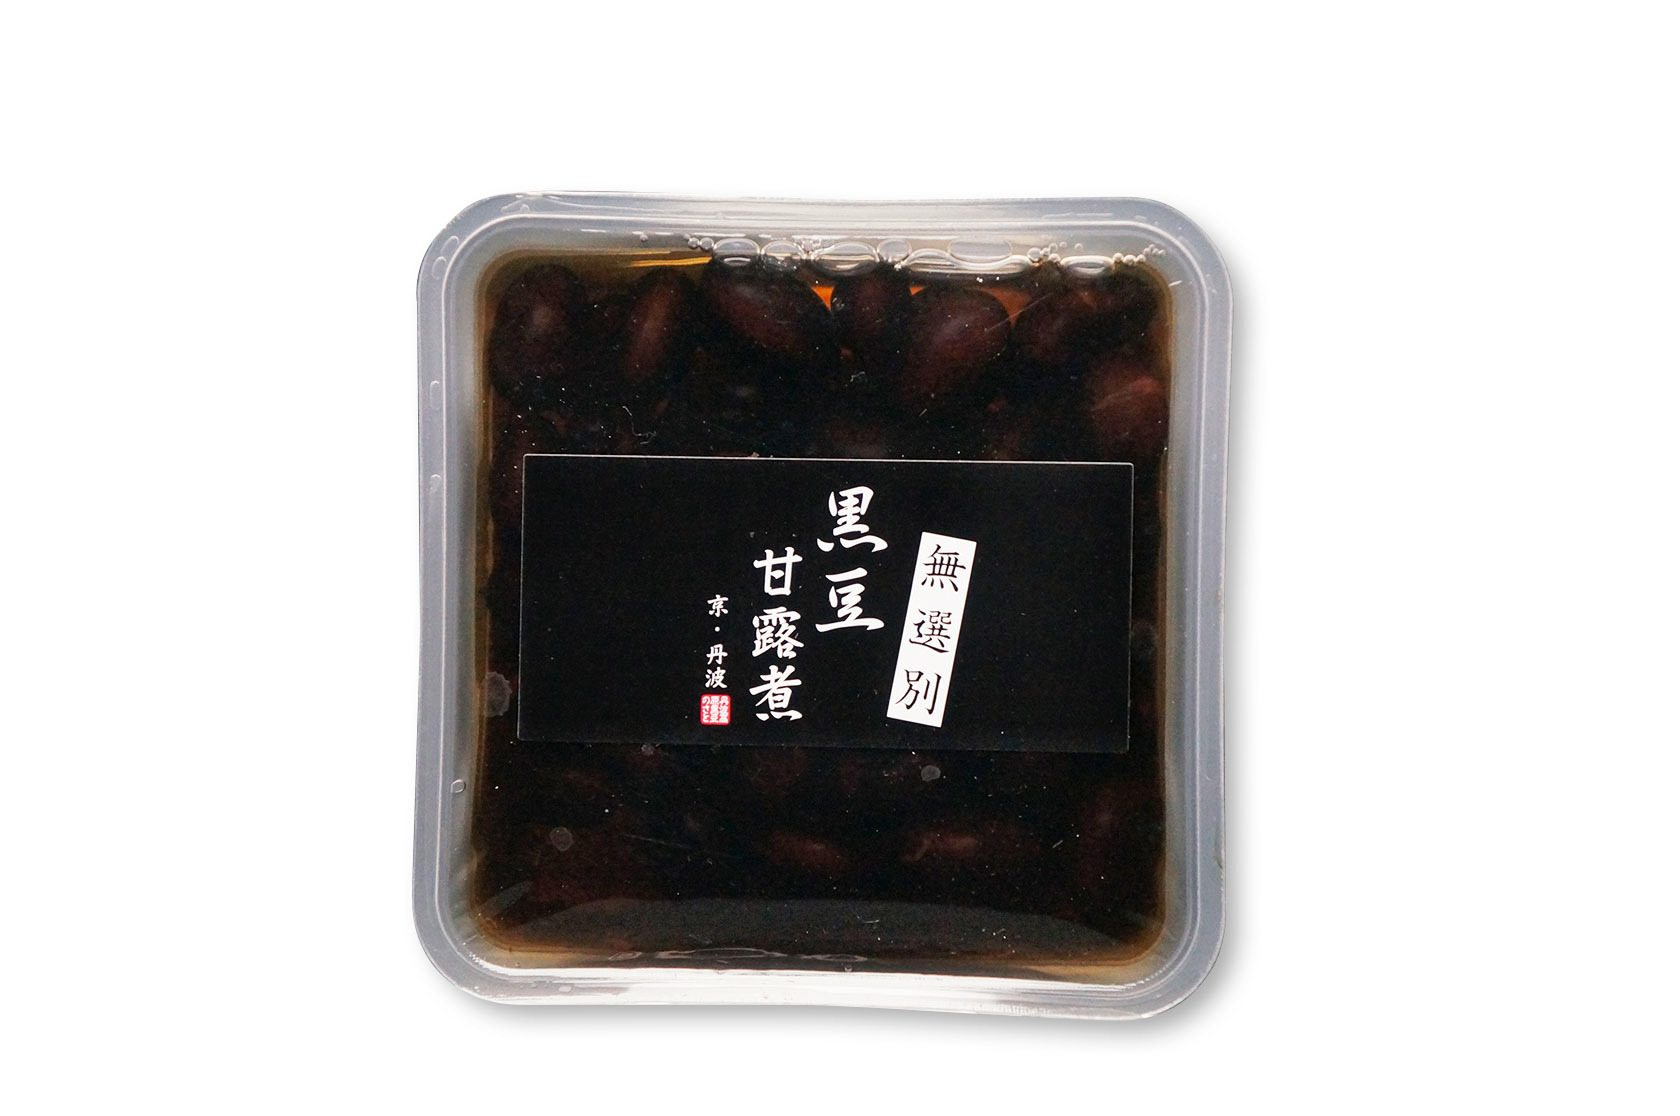 Boiled black beans (Unsorted tray)